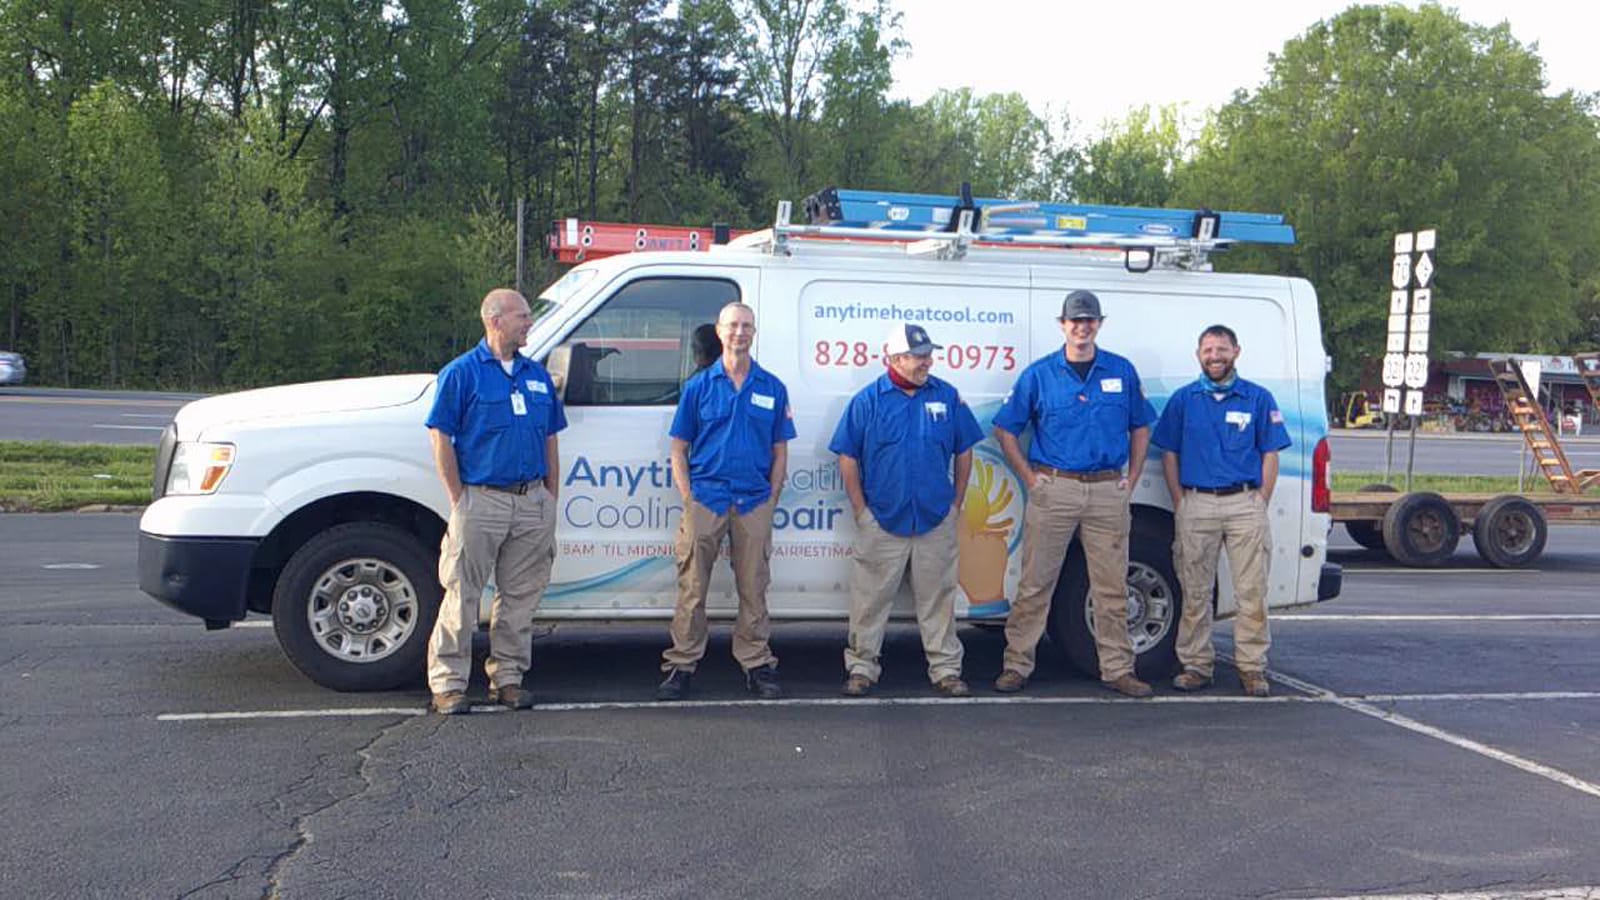 Five technicians in uniforms standing in front of their company van, equipped with ladders and HVAC repair equipment